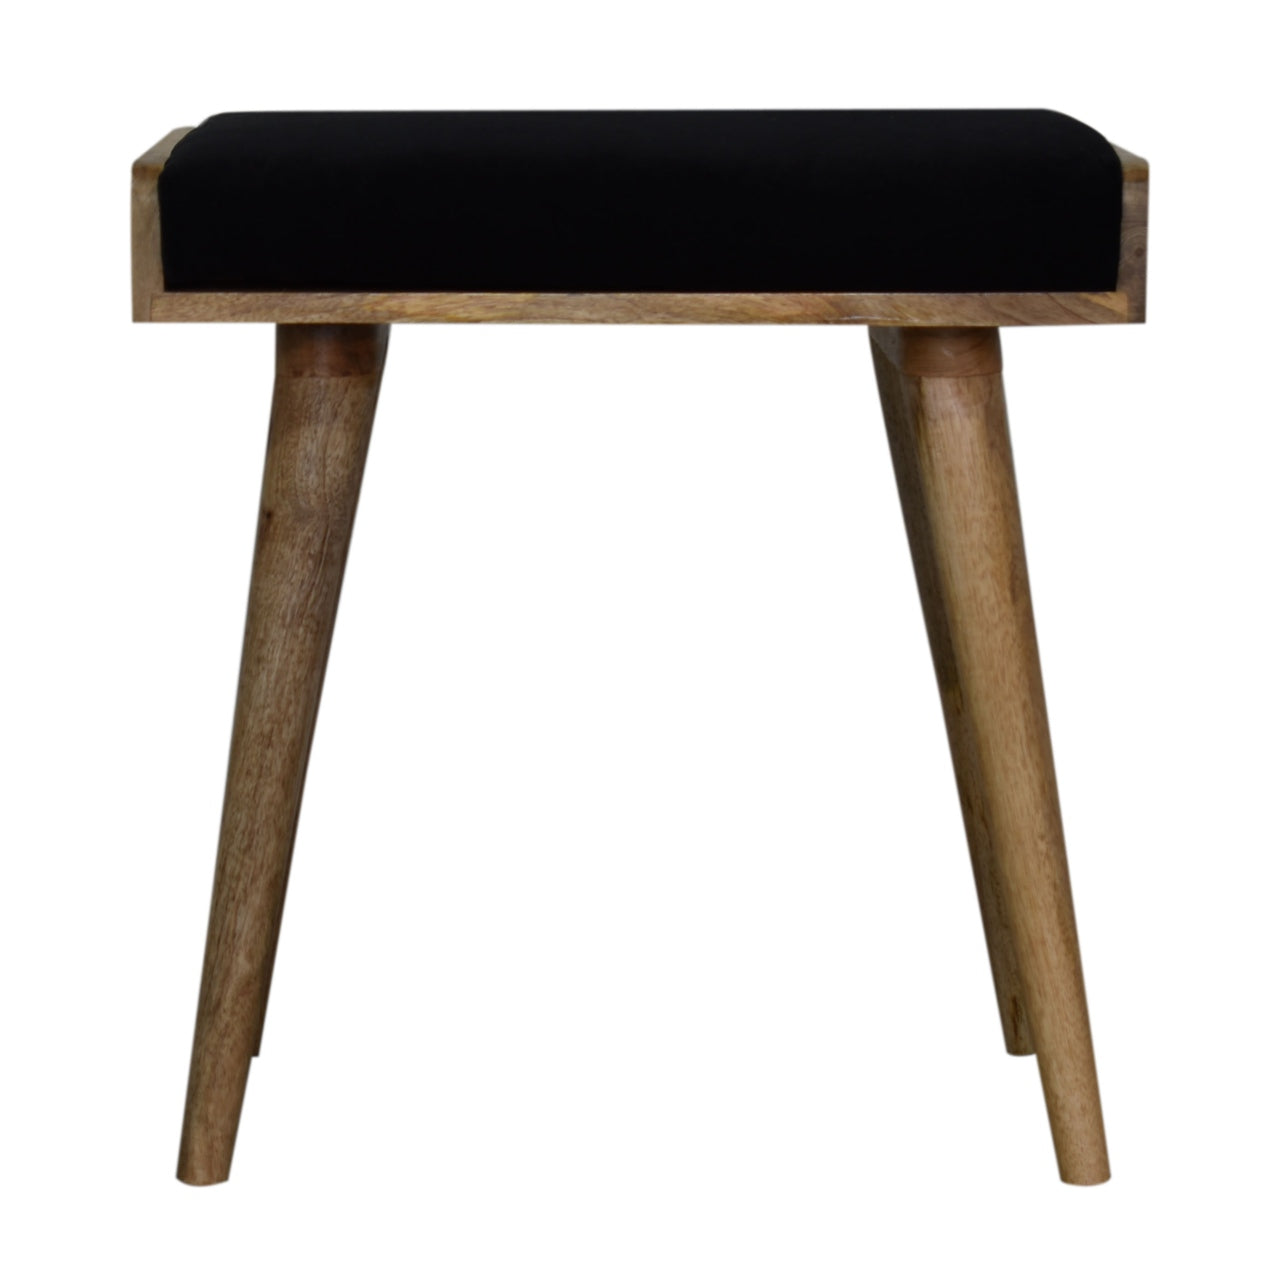 View Black Velvet Tray Style Footstool information